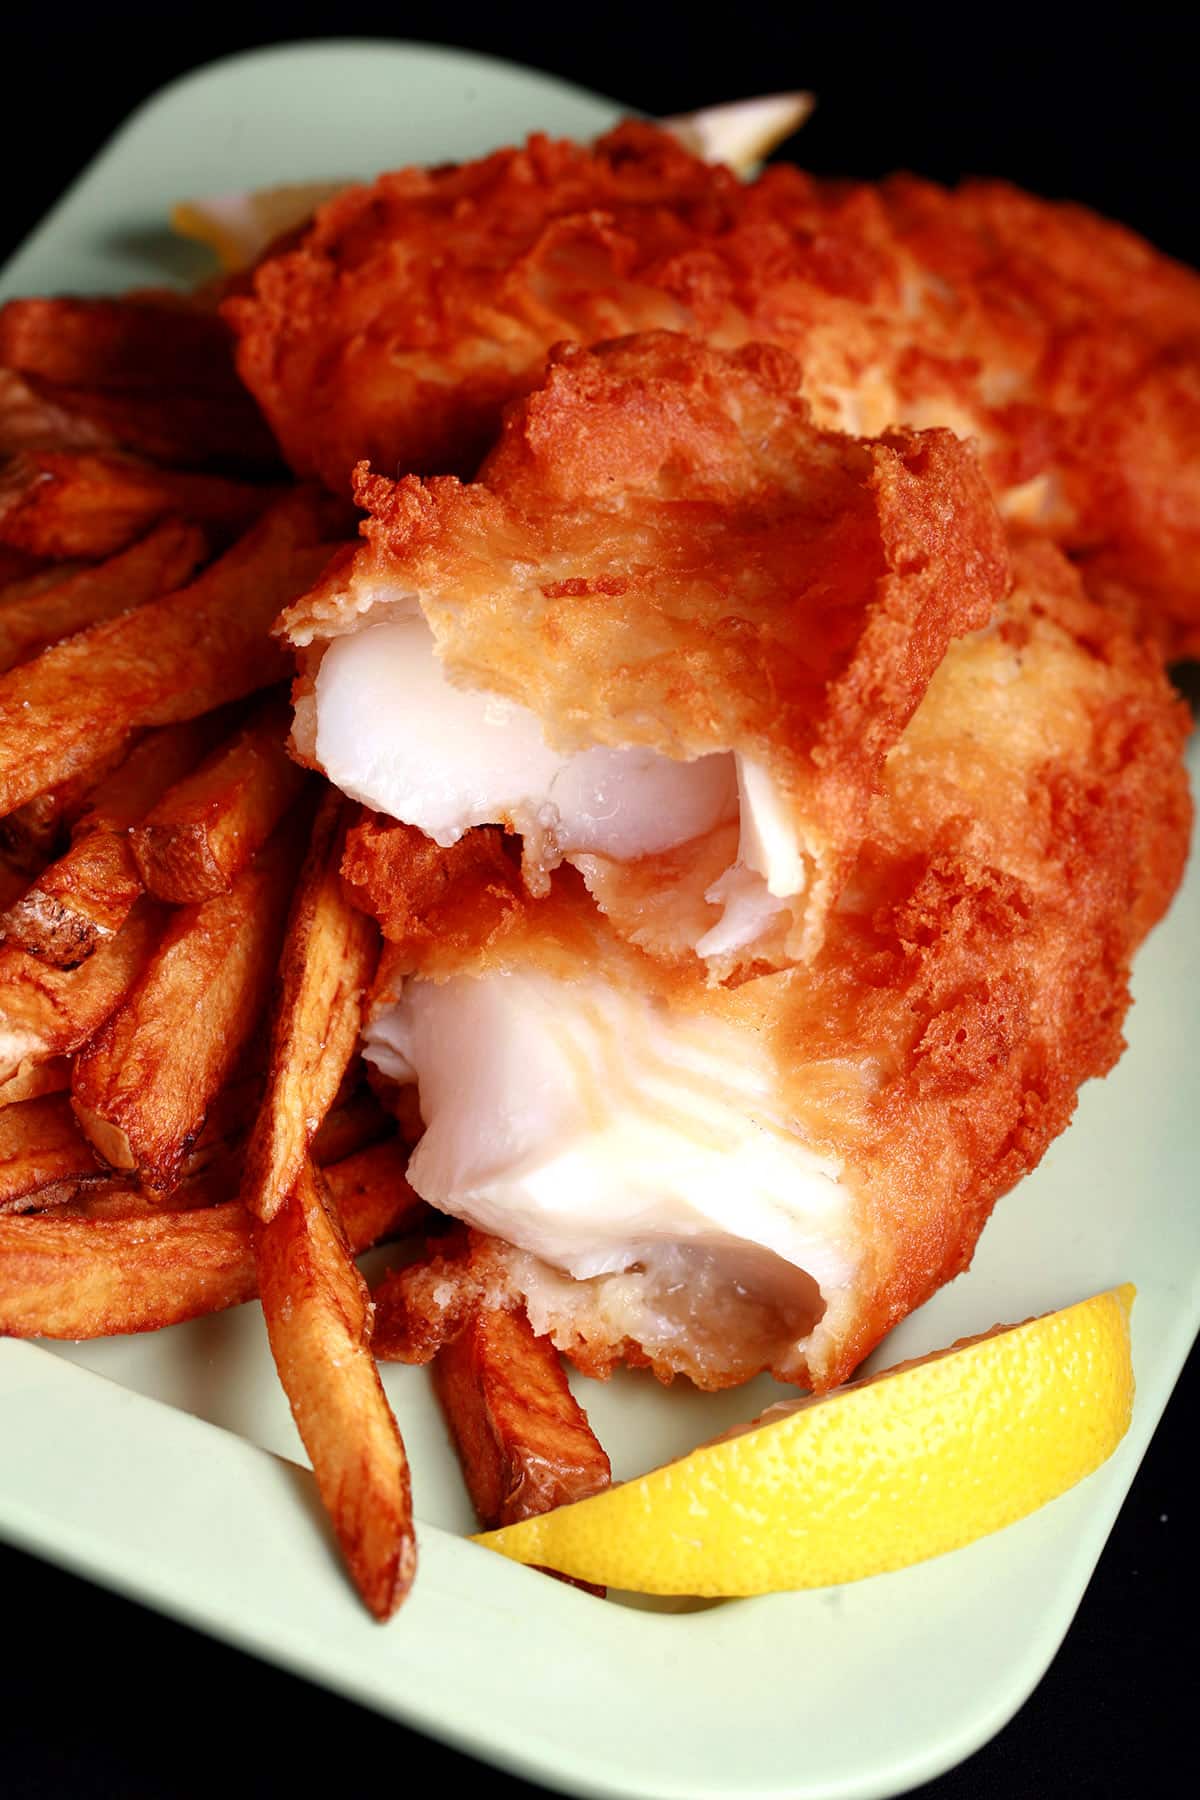 A plate of gluten free fish and chips, with a wedge of lemon.